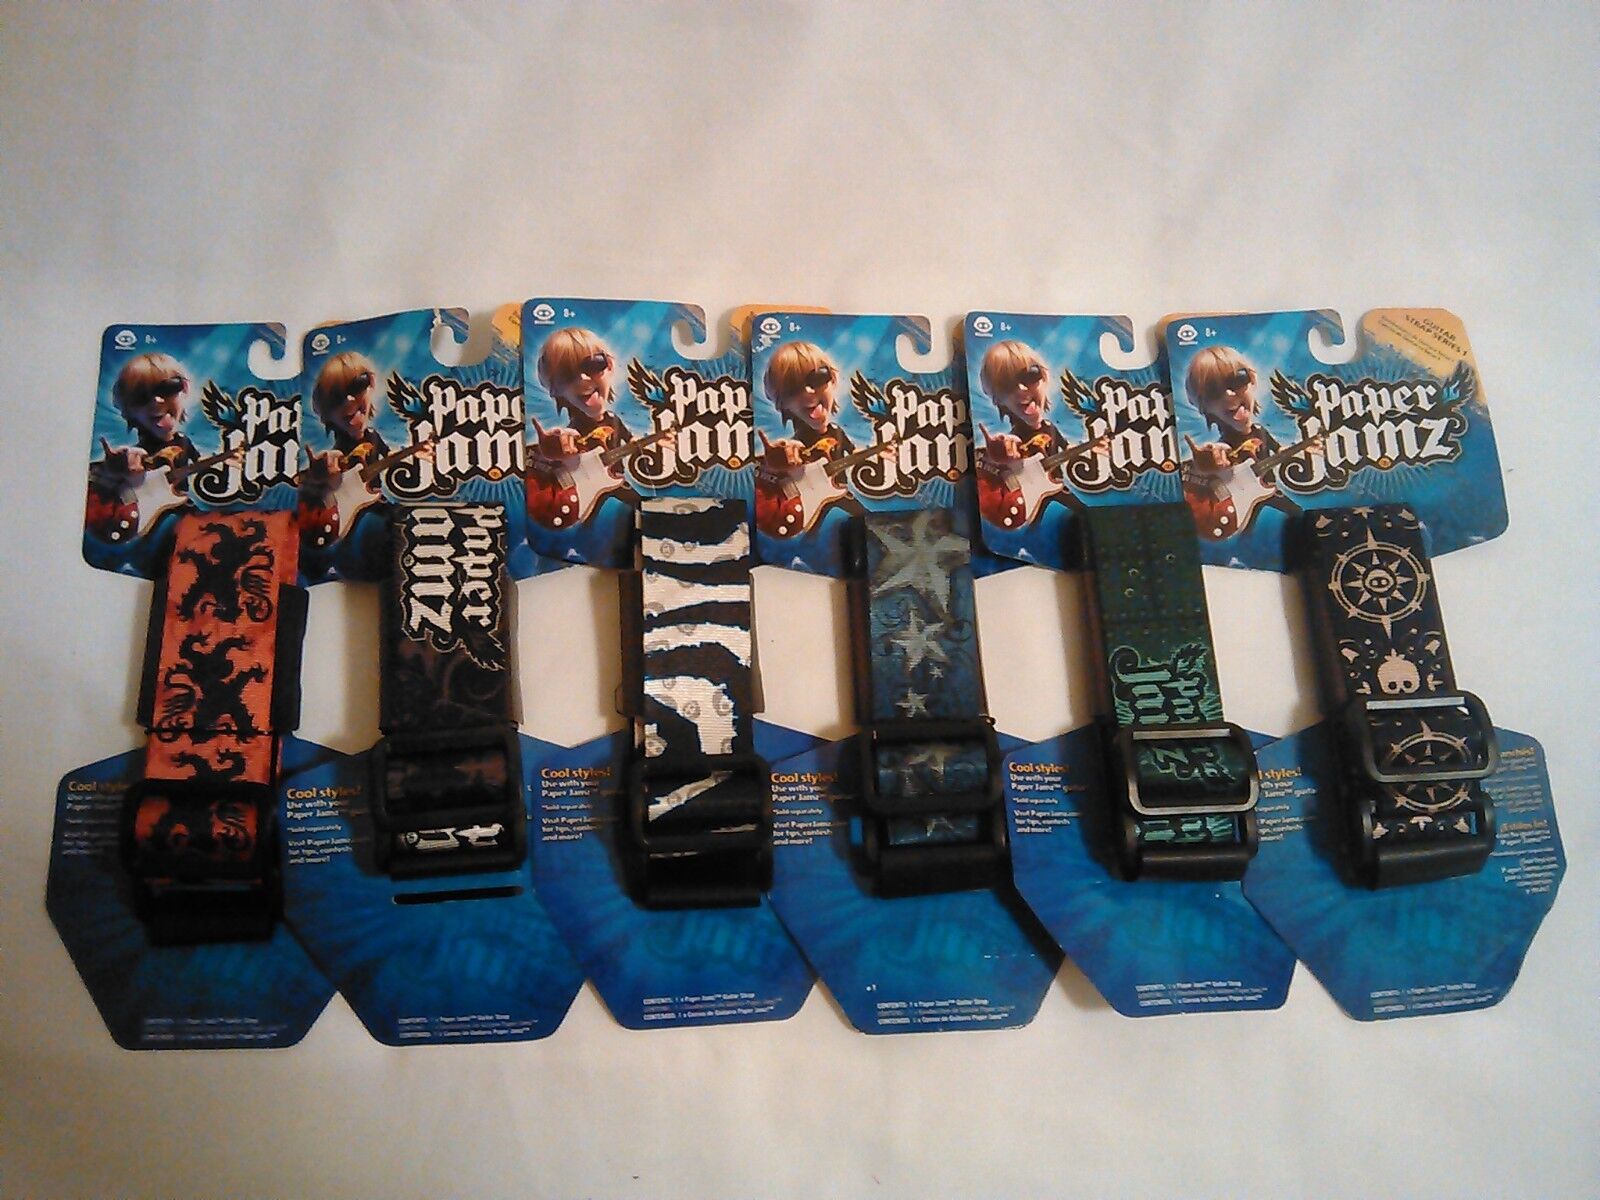  PAPER JAMZ GUITAR STRAP SERIES 1 COLLECTIONS, 6 straps-IMMEDIATE SHIPPING Paper Jamz 6273mo102top